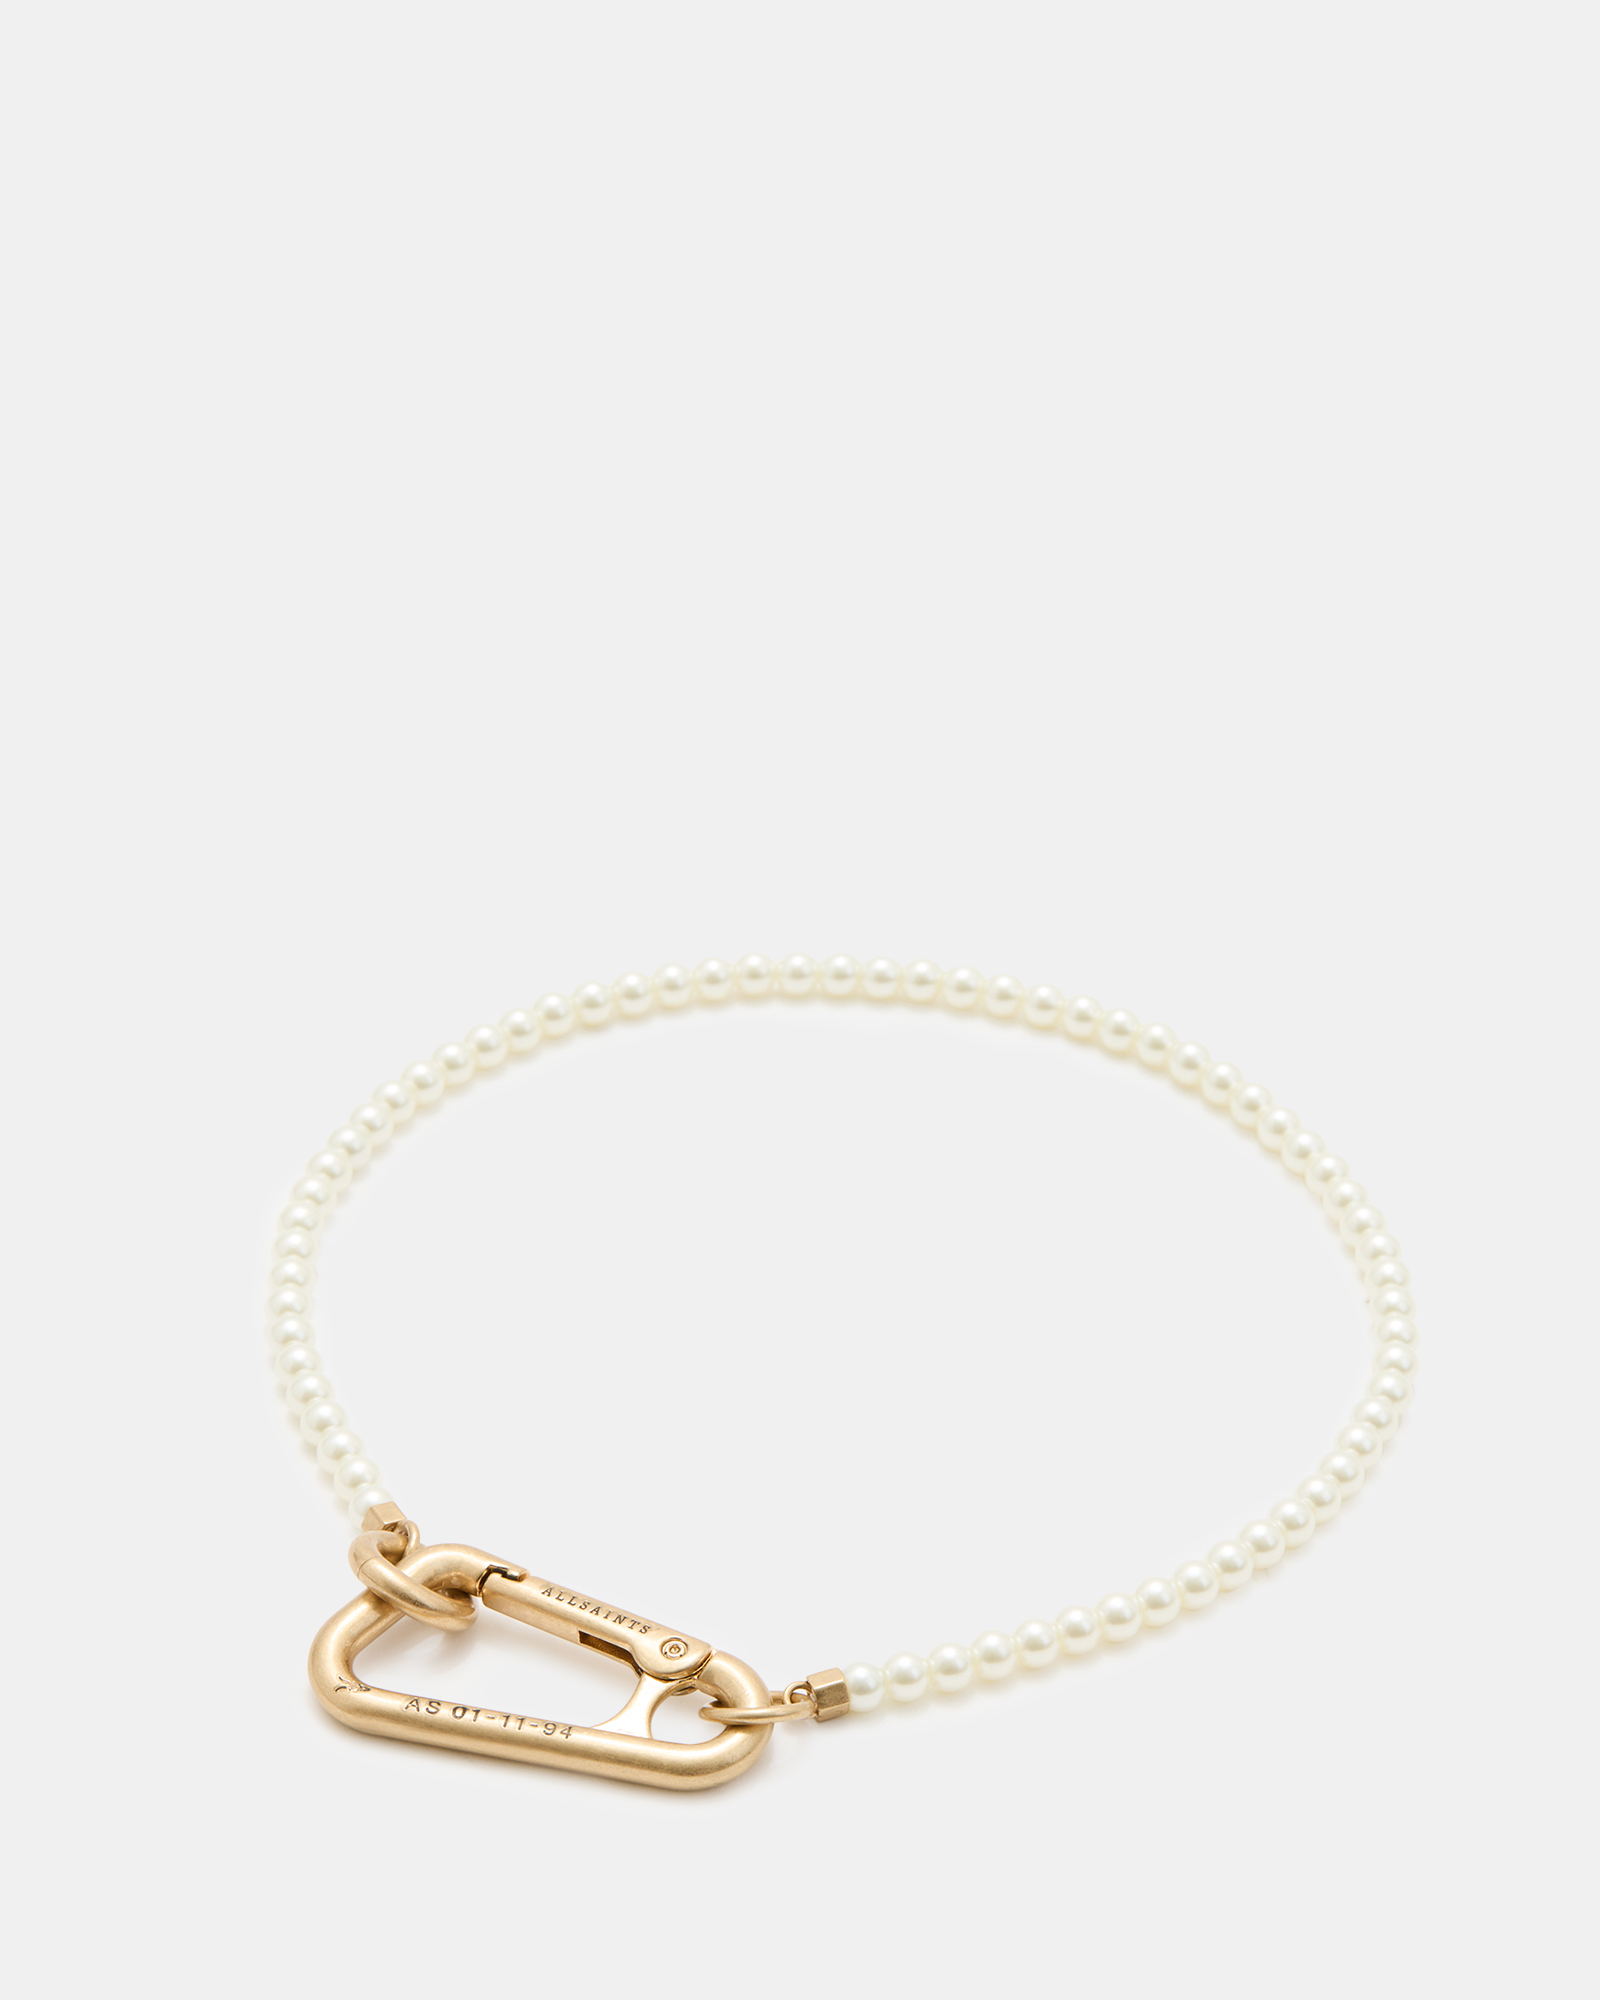 AllSaints Pearl Carabiner Clasp Necklace,, WARM BRASS/WHITE